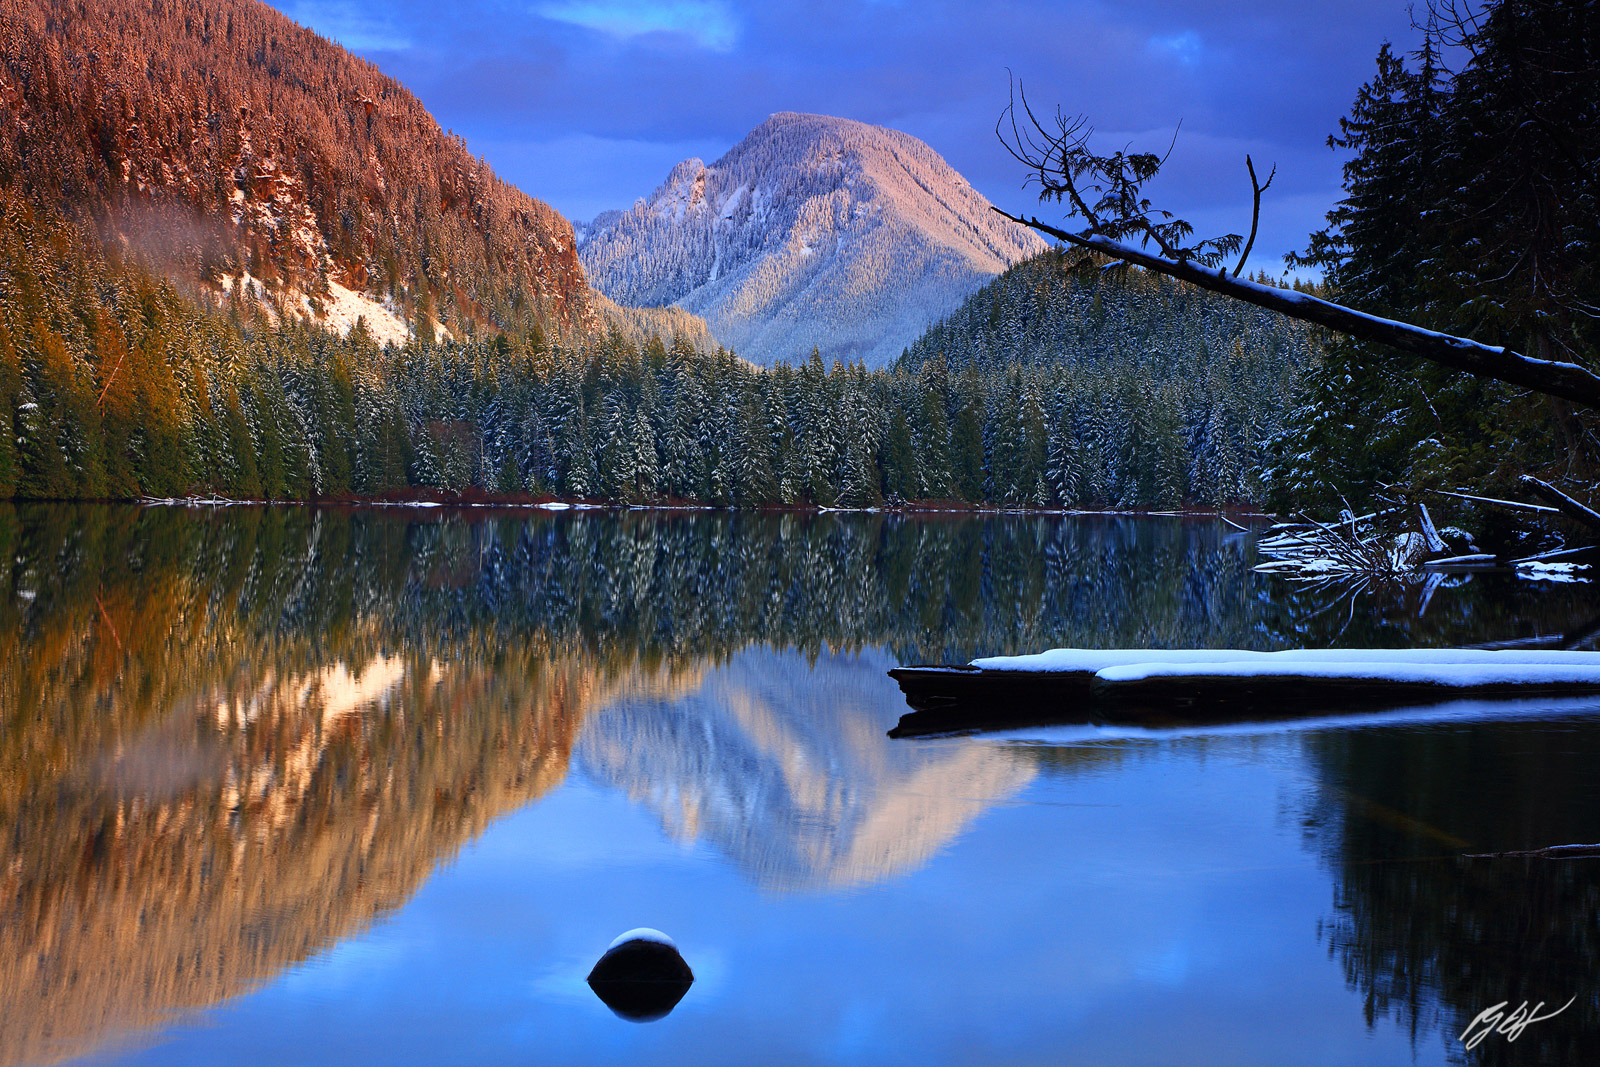 Sunset Reflection in Wallace Lake from Wallace Falls State Park in Washington